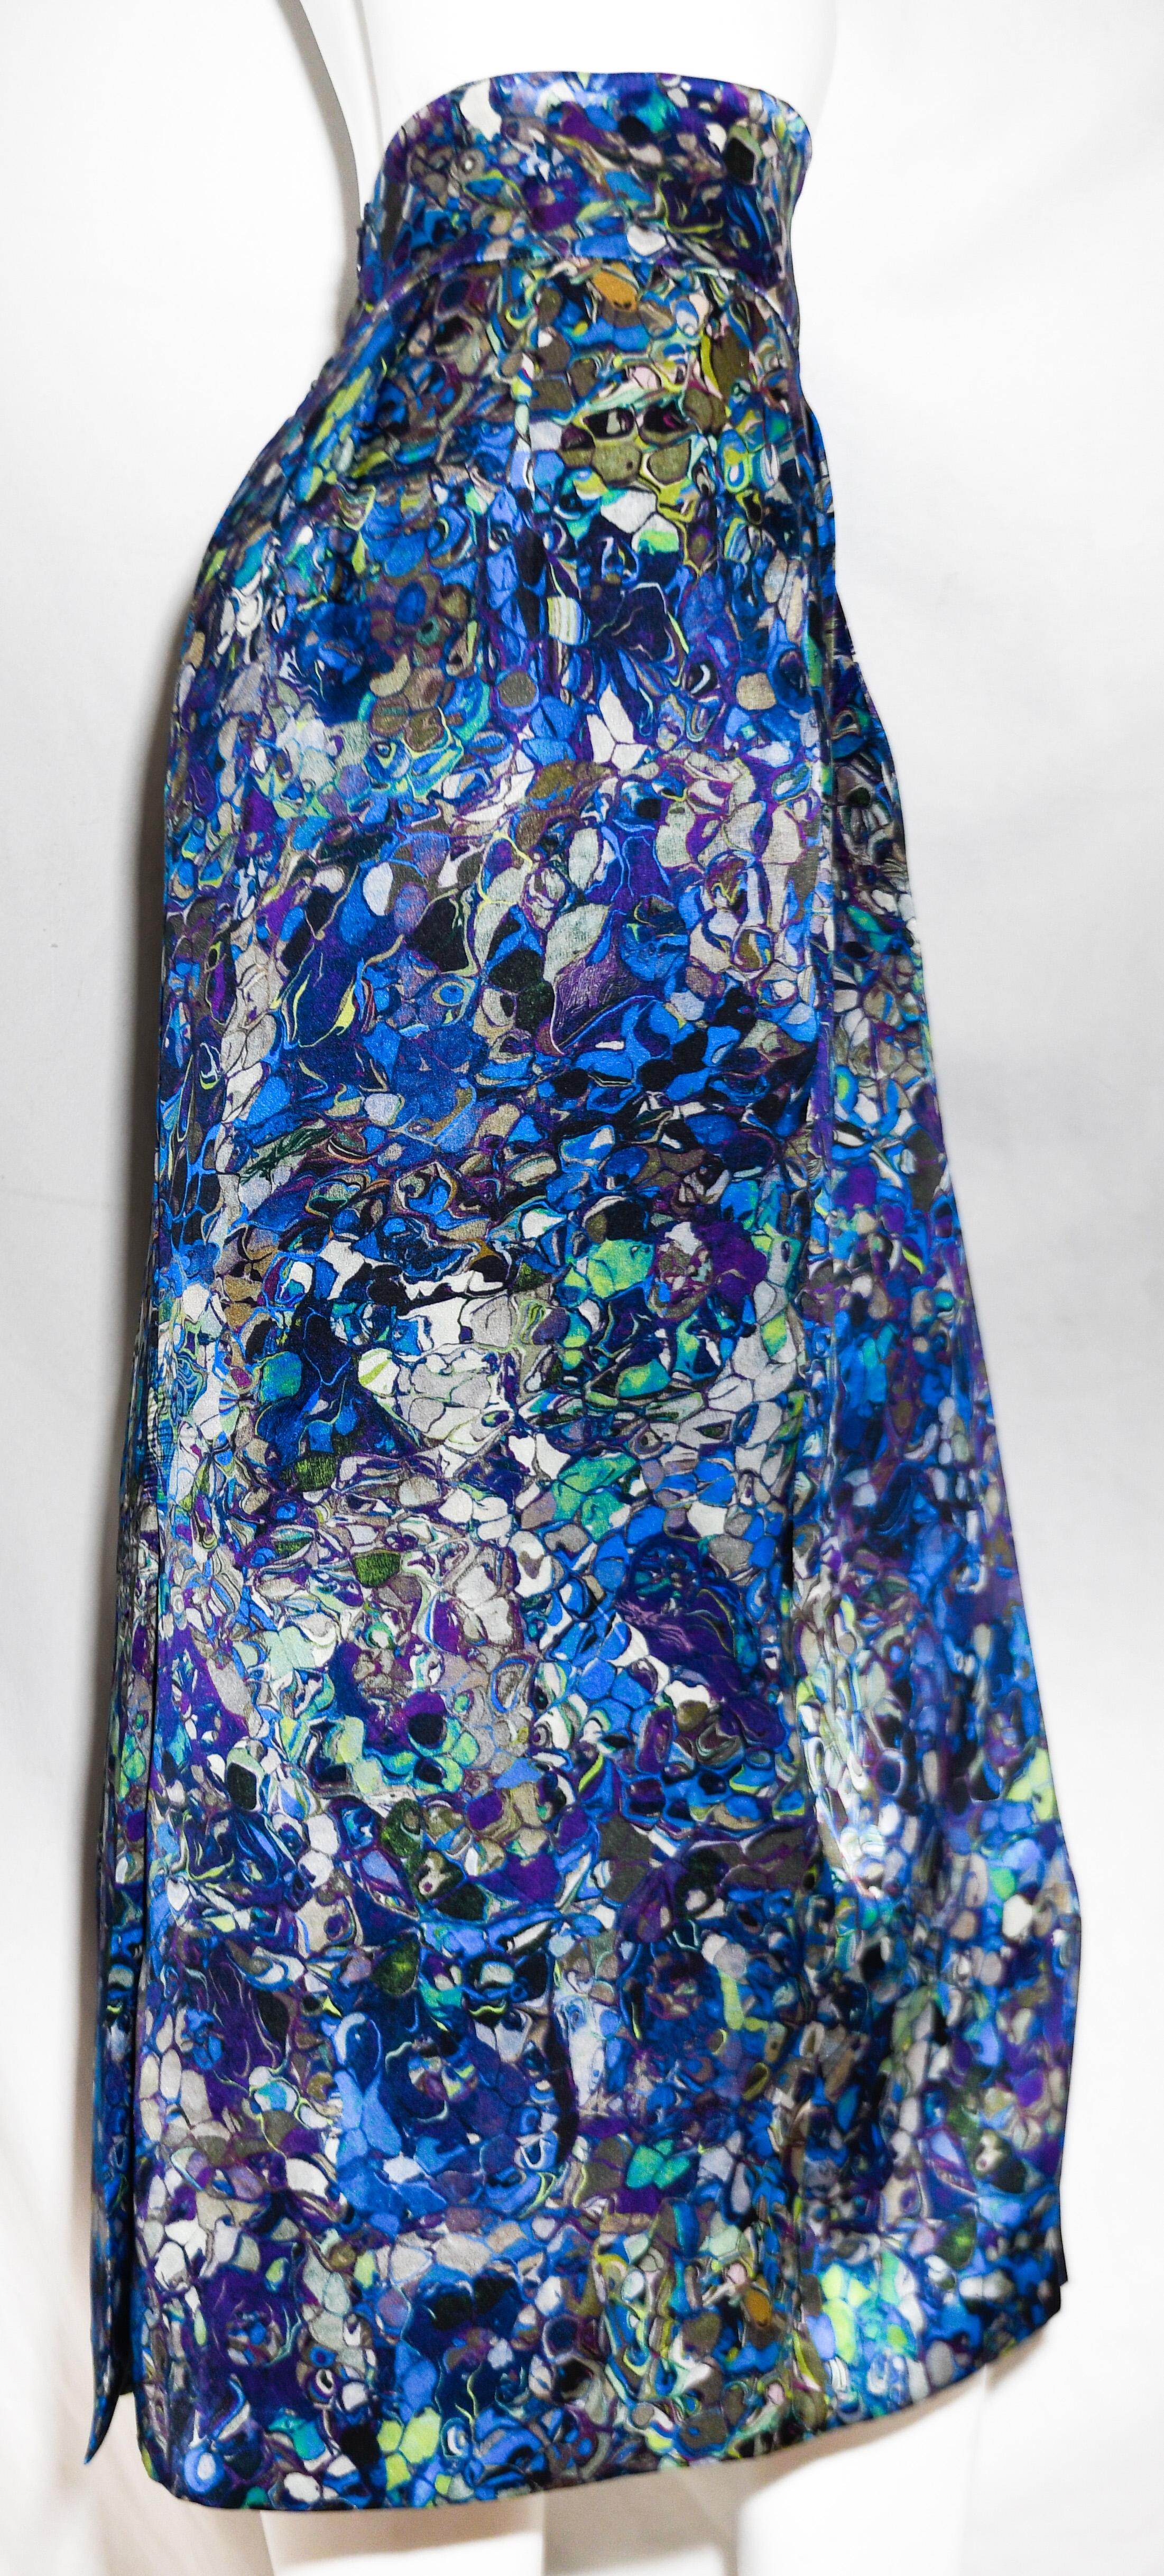 Dries Van Noten Blue Hue Abstract Print Pleated Skirt In Excellent Condition For Sale In Palm Beach, FL